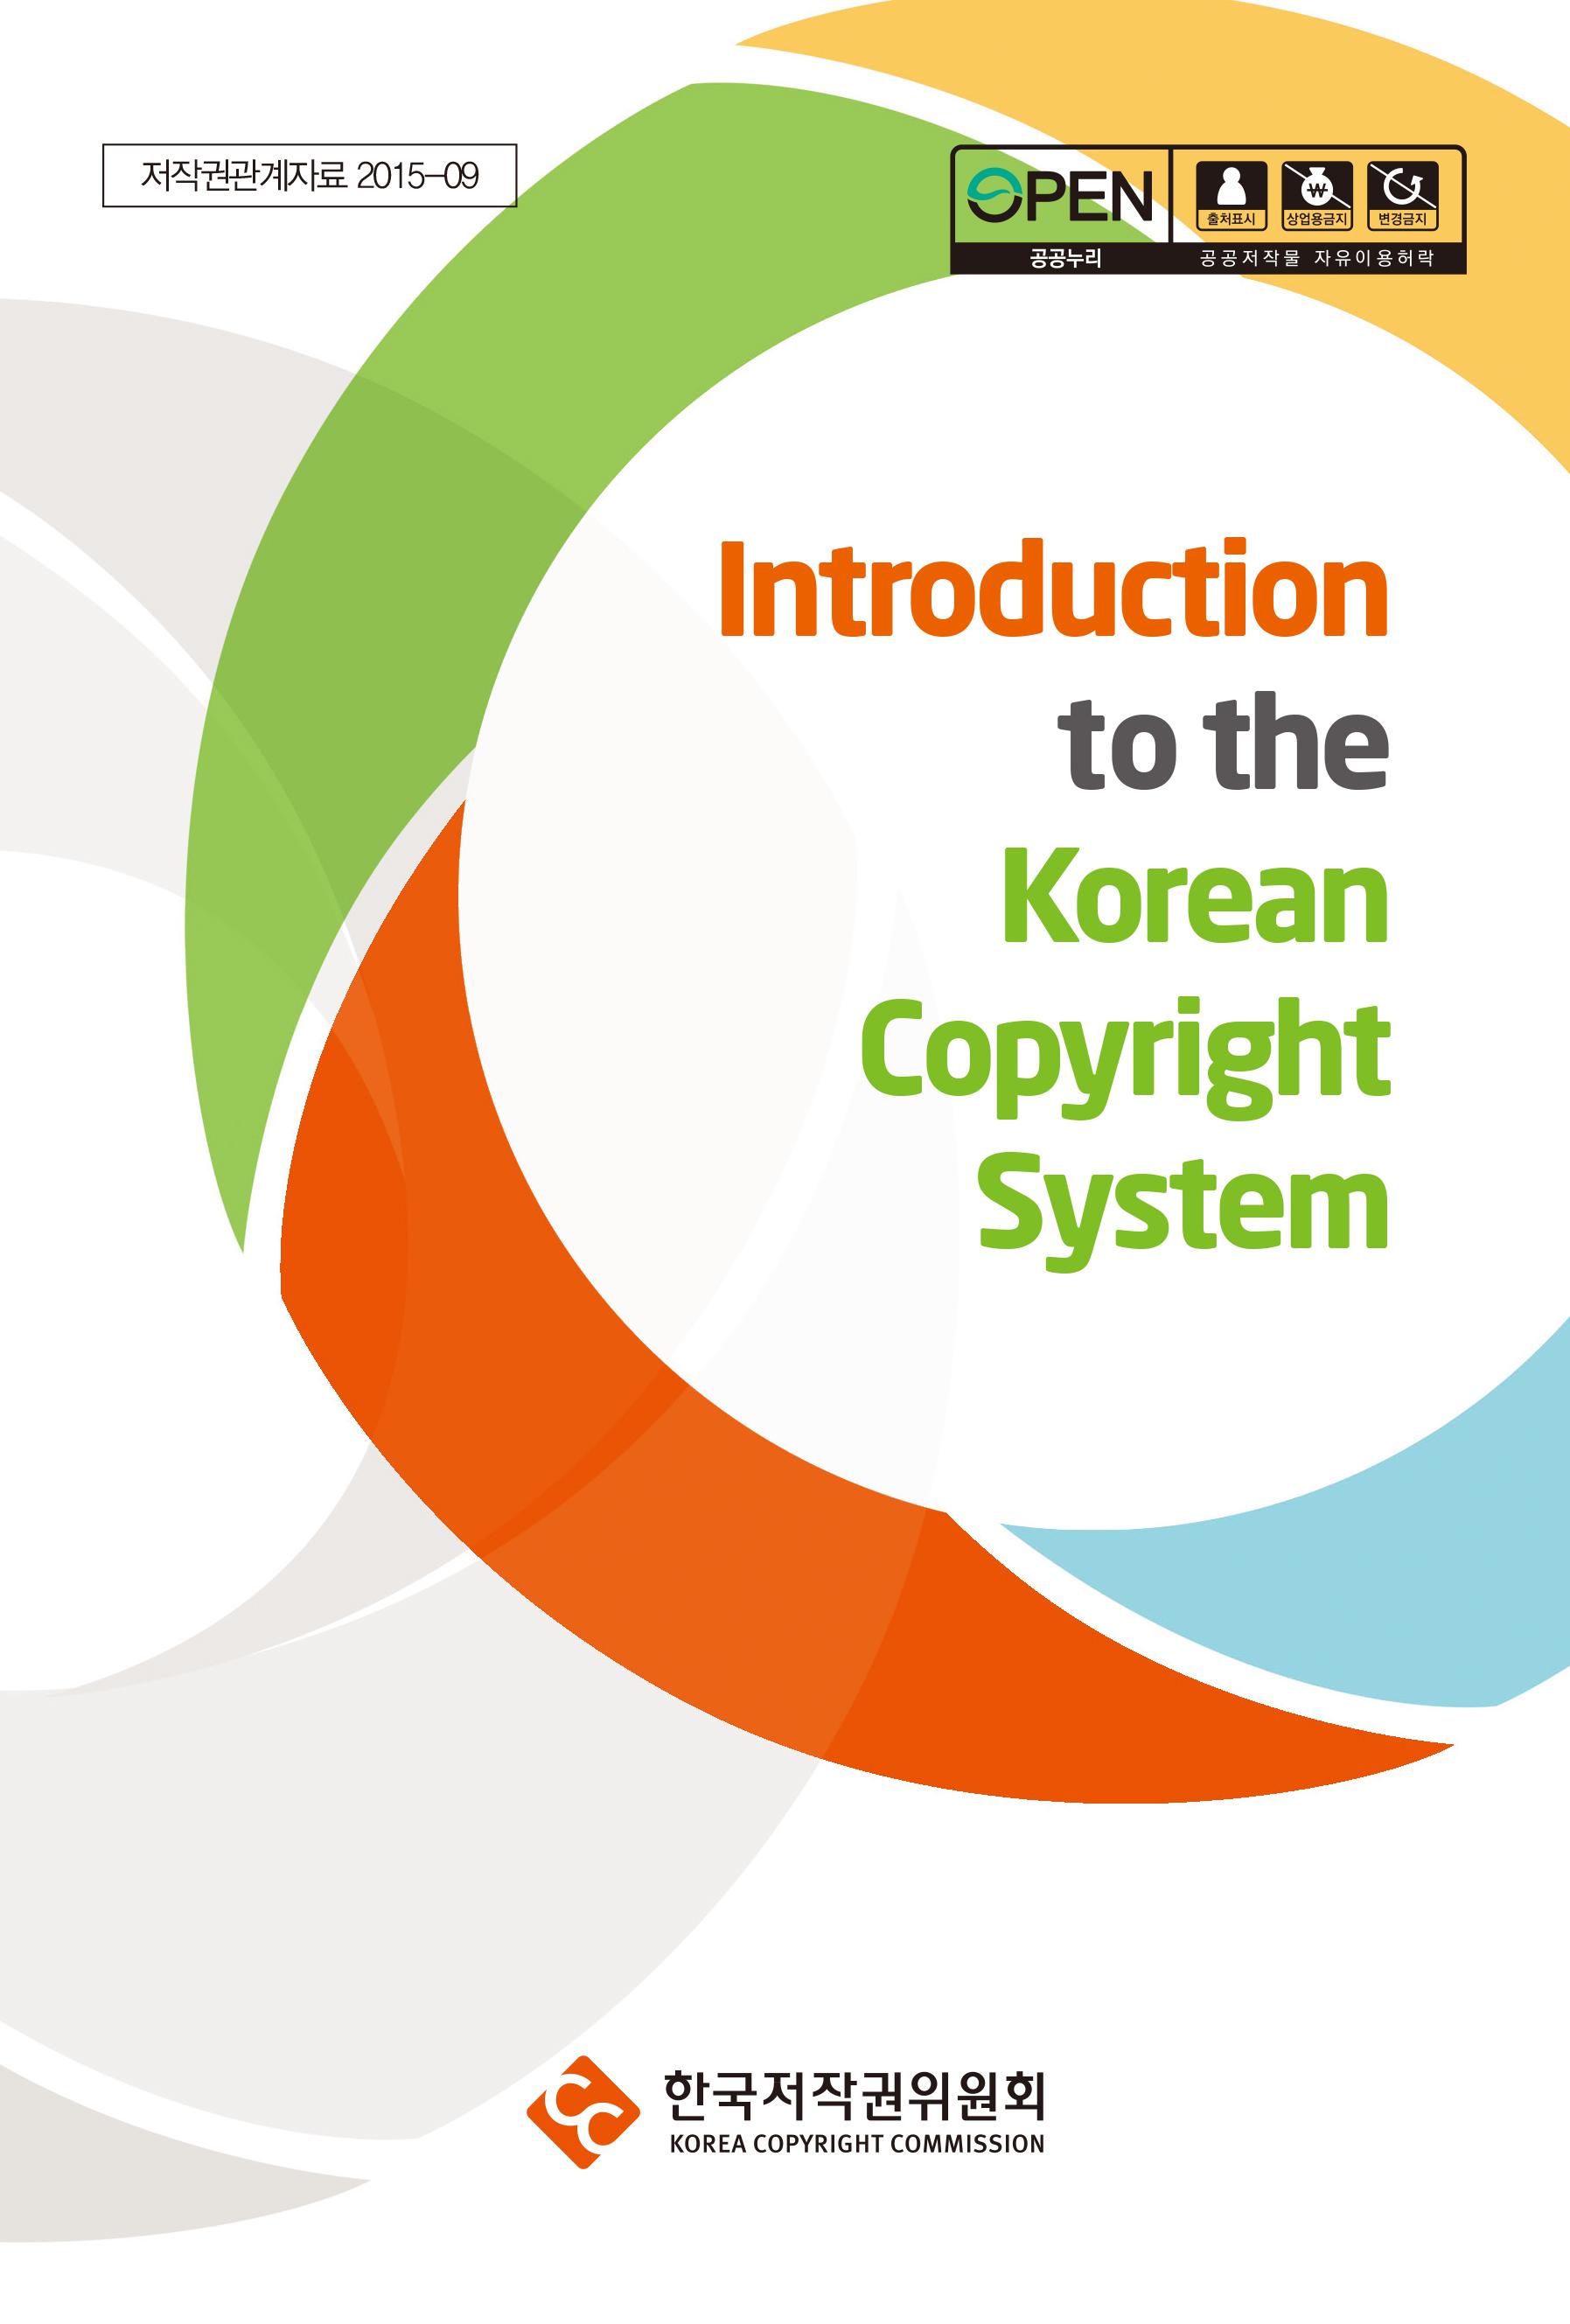 INTRODUCTION TO THE KOREAN COPYRIGHT SYSTEM